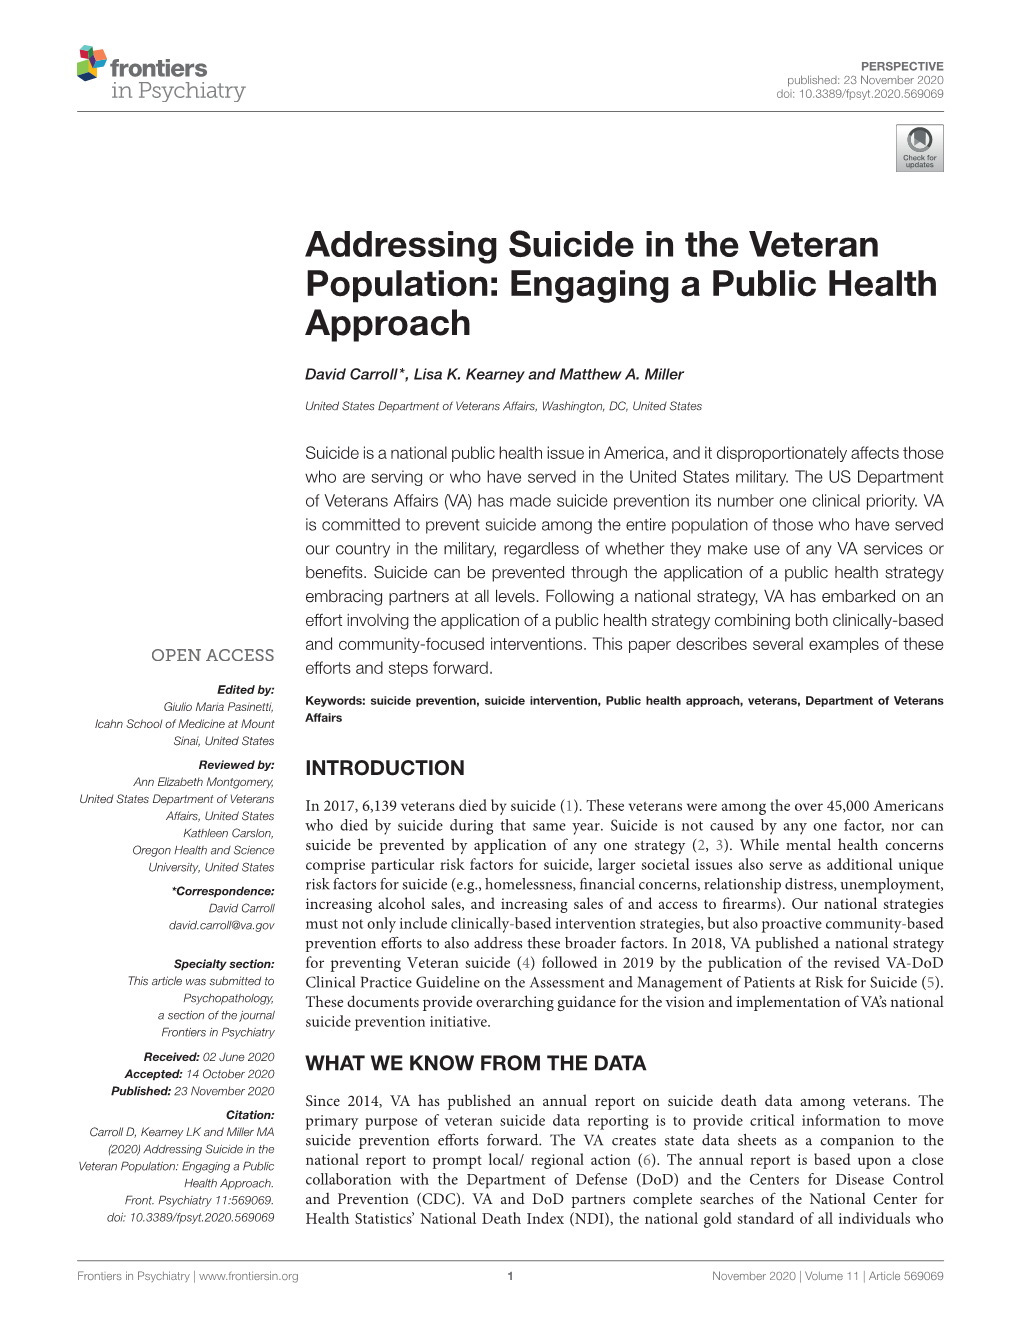 Addressing Suicide in the Veteran Population: Engaging a Public Health Approach